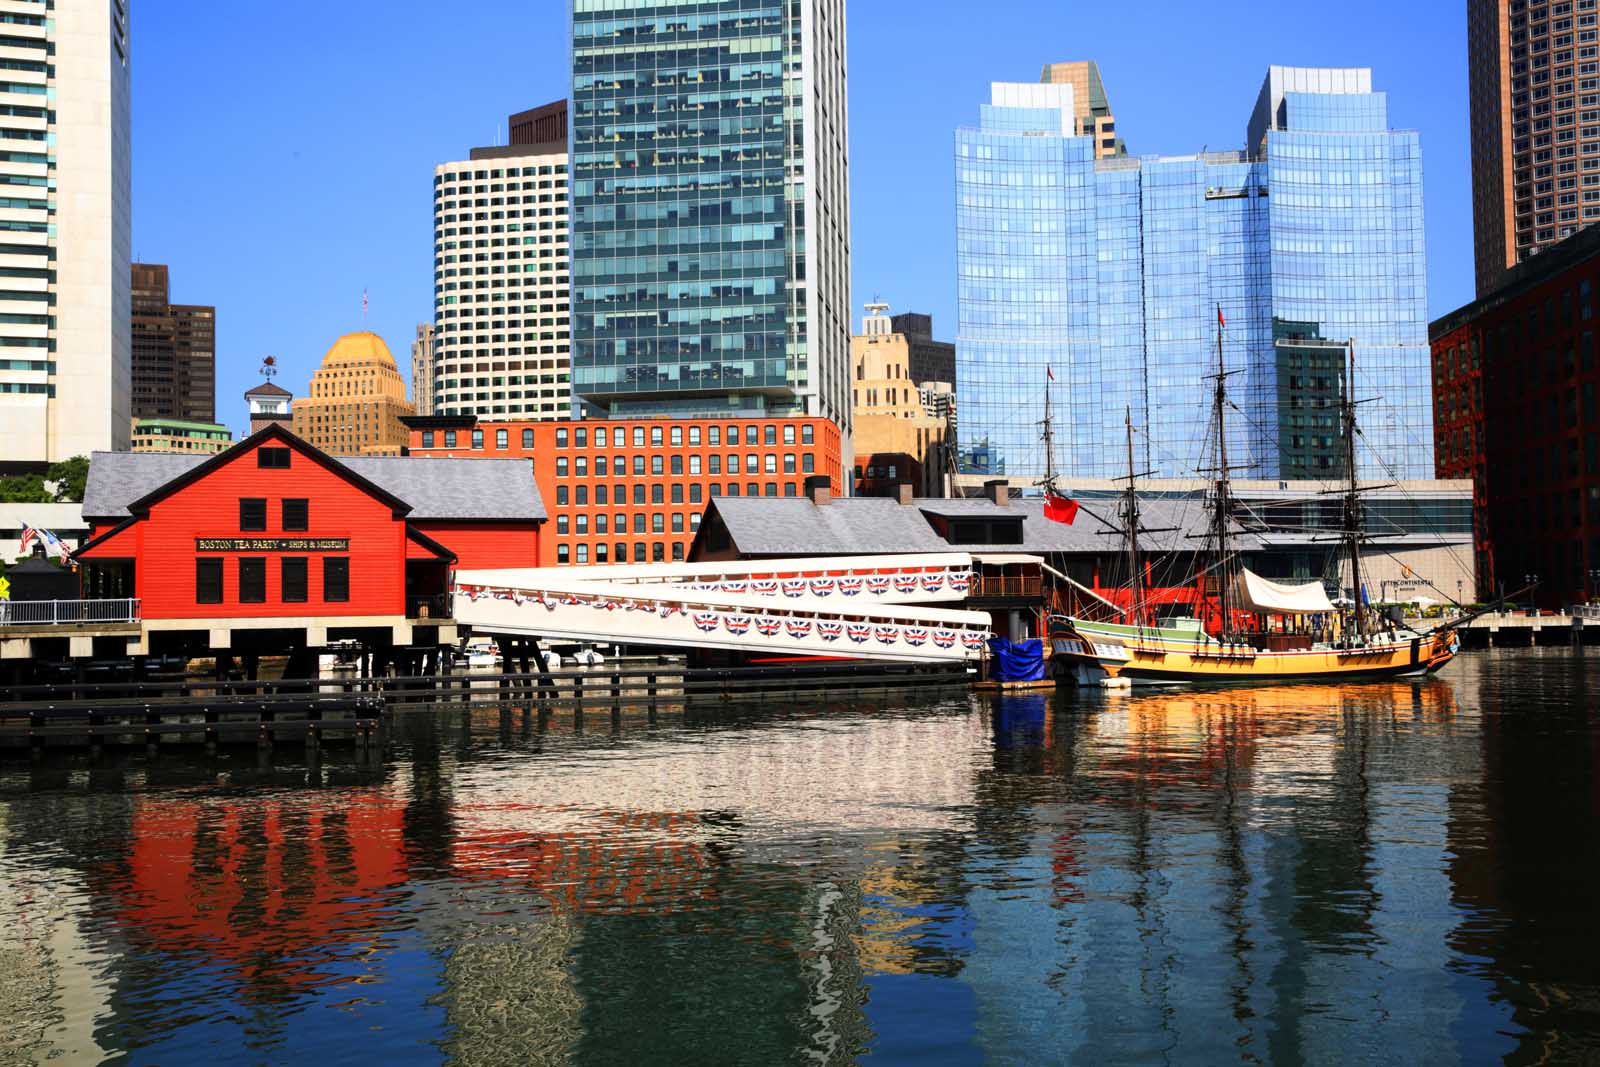 Things to do in Boston Tea Party Ships Museum